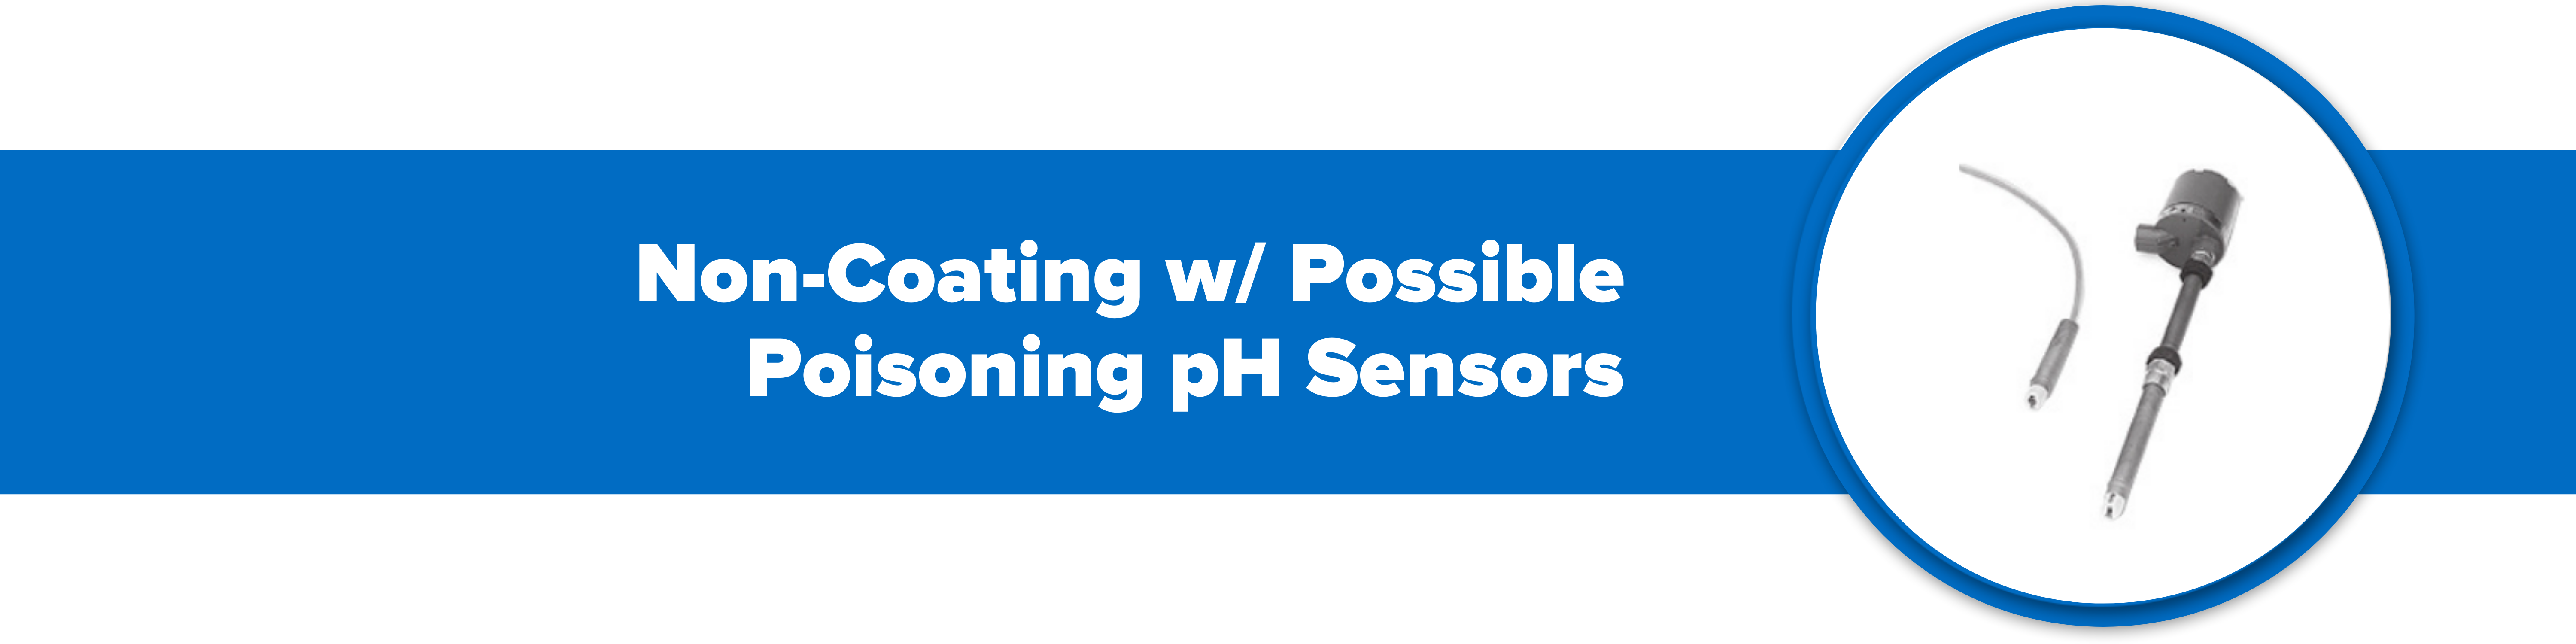 Header image with text 'non-coating with possible poisoning pH sensors'.